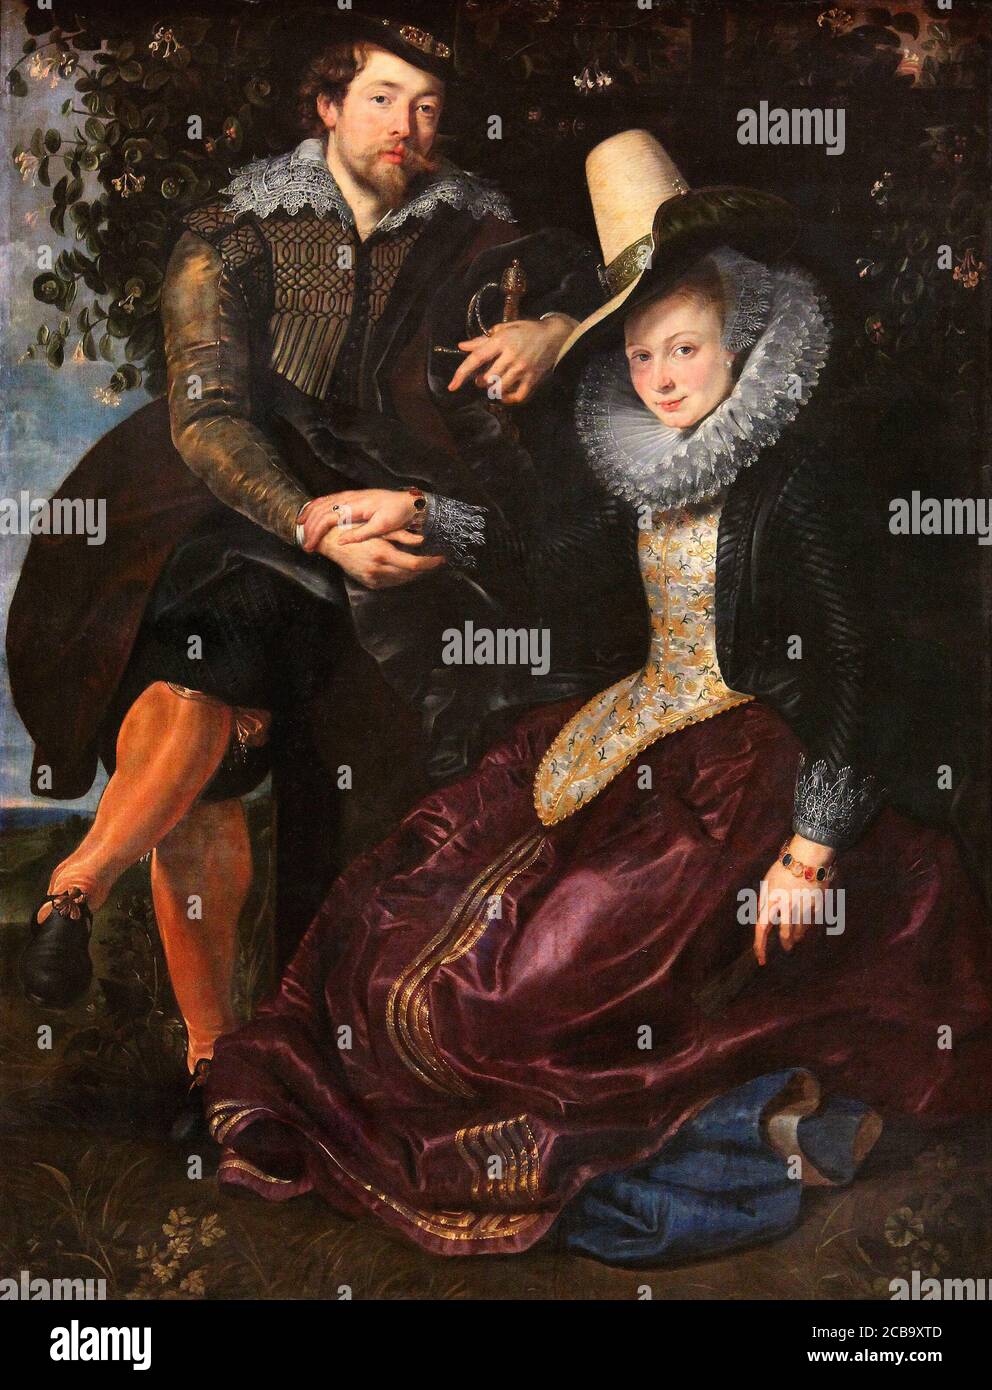 Rubens And Isabella Brandt by Peter Paul Rubens 1609. Alte Pinakothek Museum in Munich, Germany Stock Photo